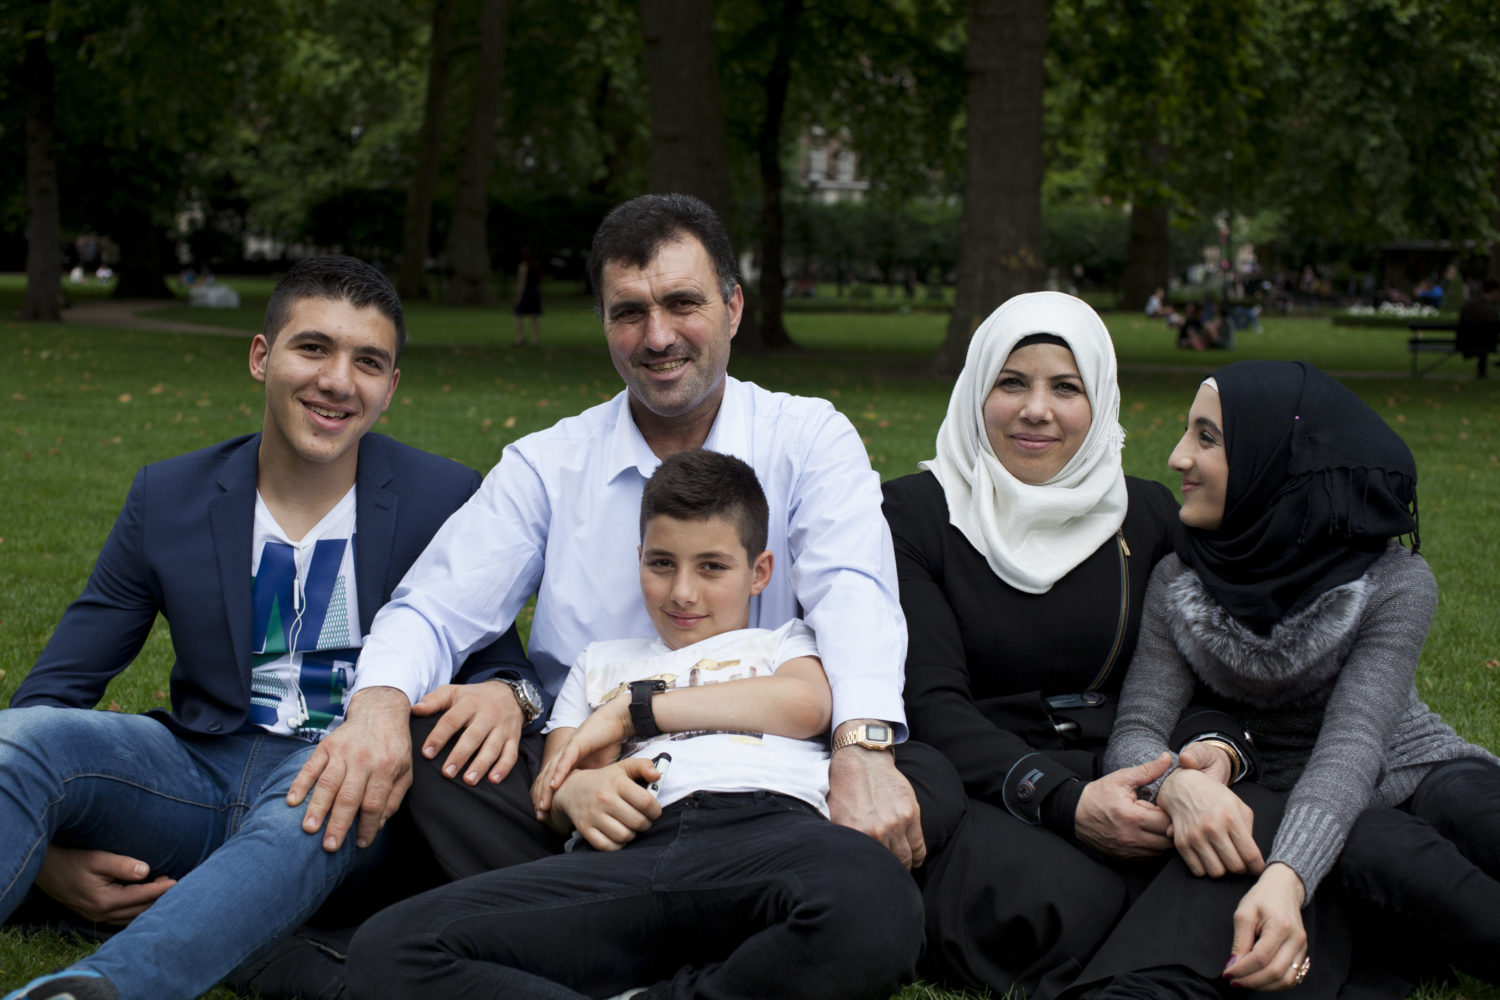 Nabila, 13, and her family fled the war in Syria. Her family experienced the heartbreak of separation, until they were finally reunited in Glasgow. Nabila was 12 when her dad, Ahmad, left Syria in a boat. If Ahmad could reach Europe, he could rescue his wife and children from a terrifying life dodging gunfire and bombs. In recalling the separation, Nabilia says “in those last minutes I was saying to him, 'Don’t leave me, just stay here, don’t go. It's fine, we’re gonna stay in the war, but don’t go'. Unicef/Glasgow 2017